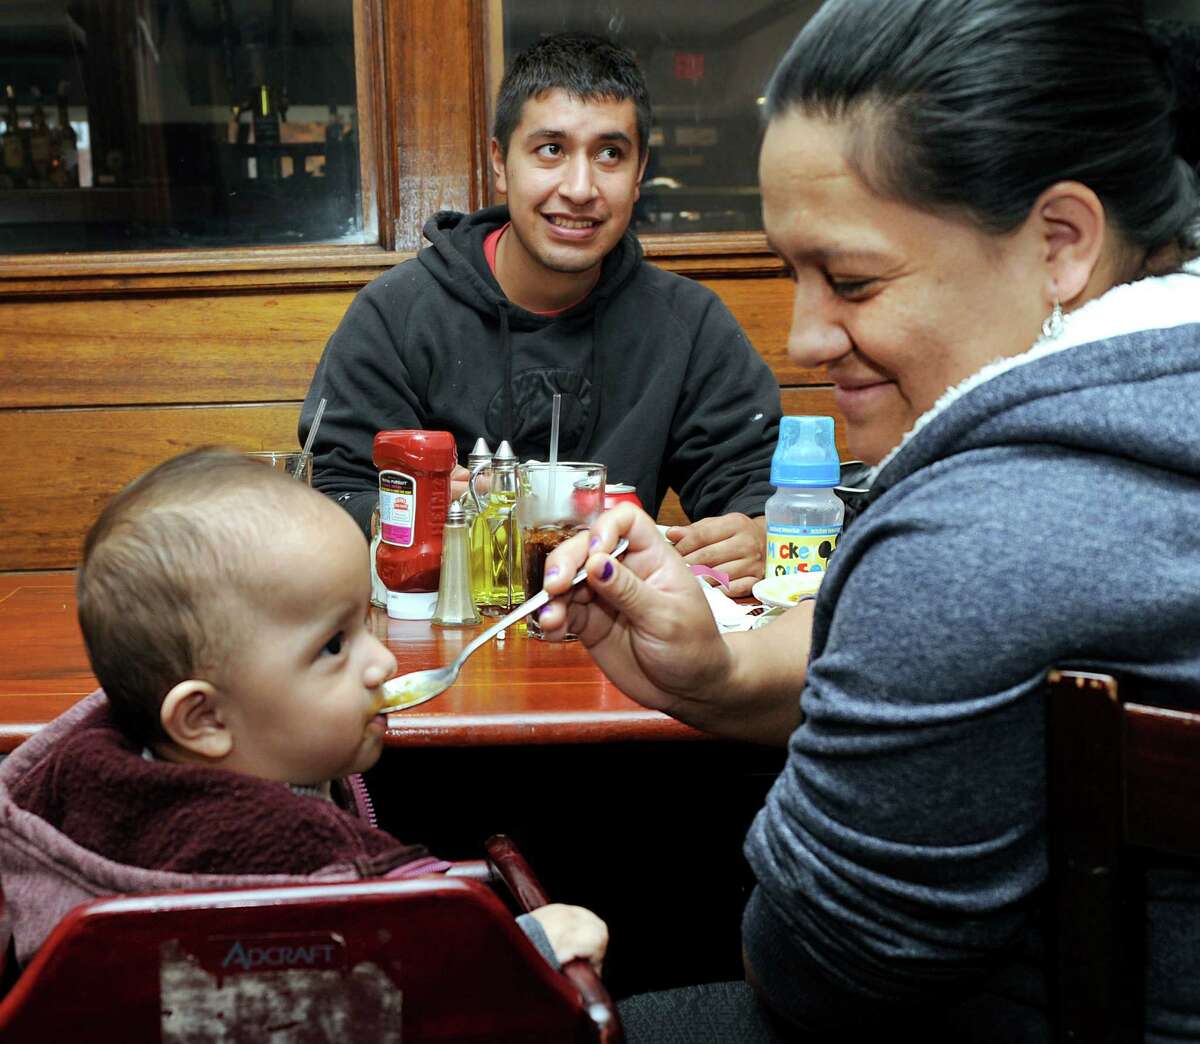 Christian and Alexandra Fajardo have lunch together at Mitad Del Mundo with 7-month-old baby, Jeeryk. Mitad Del Mundo, an Ecuadorian restaurant owned by Wilson Hernandez, recently moved from West Street to 275 Main Street in Danbury, Coon. Photo Monday, Nov. 2, 2015.